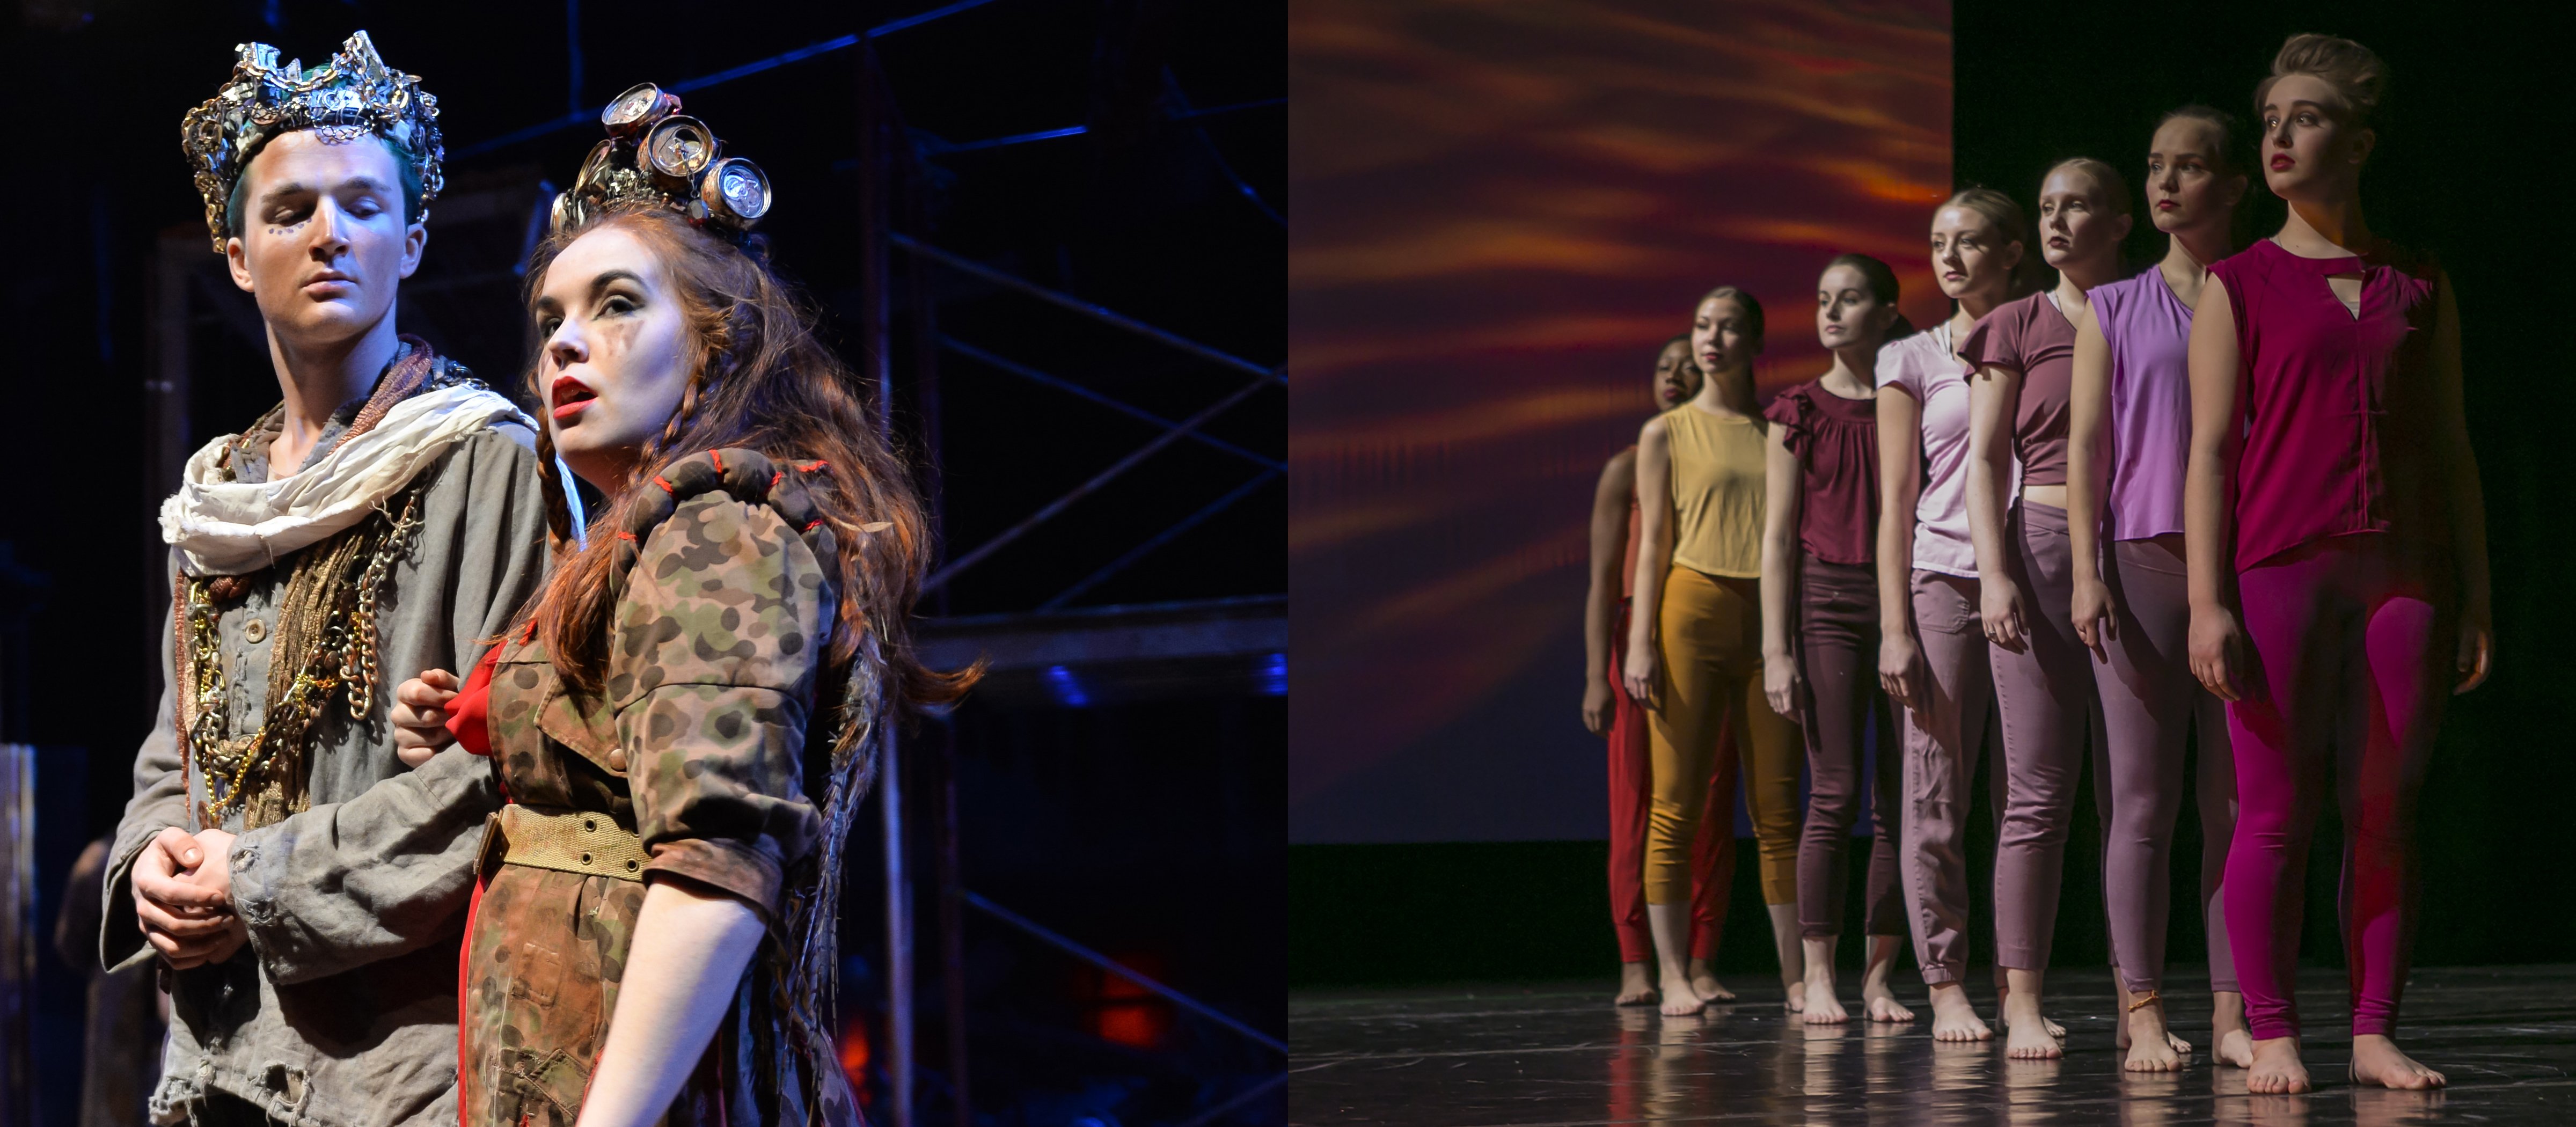  Image 1: King and Queen from Rowan’s post-apocalyptic take on William Shakespeare’s Titus Andronicus. Image 2: Seven female dancers from “Beloved Community: A dance concert” in a line gazig to the left side of the stage.